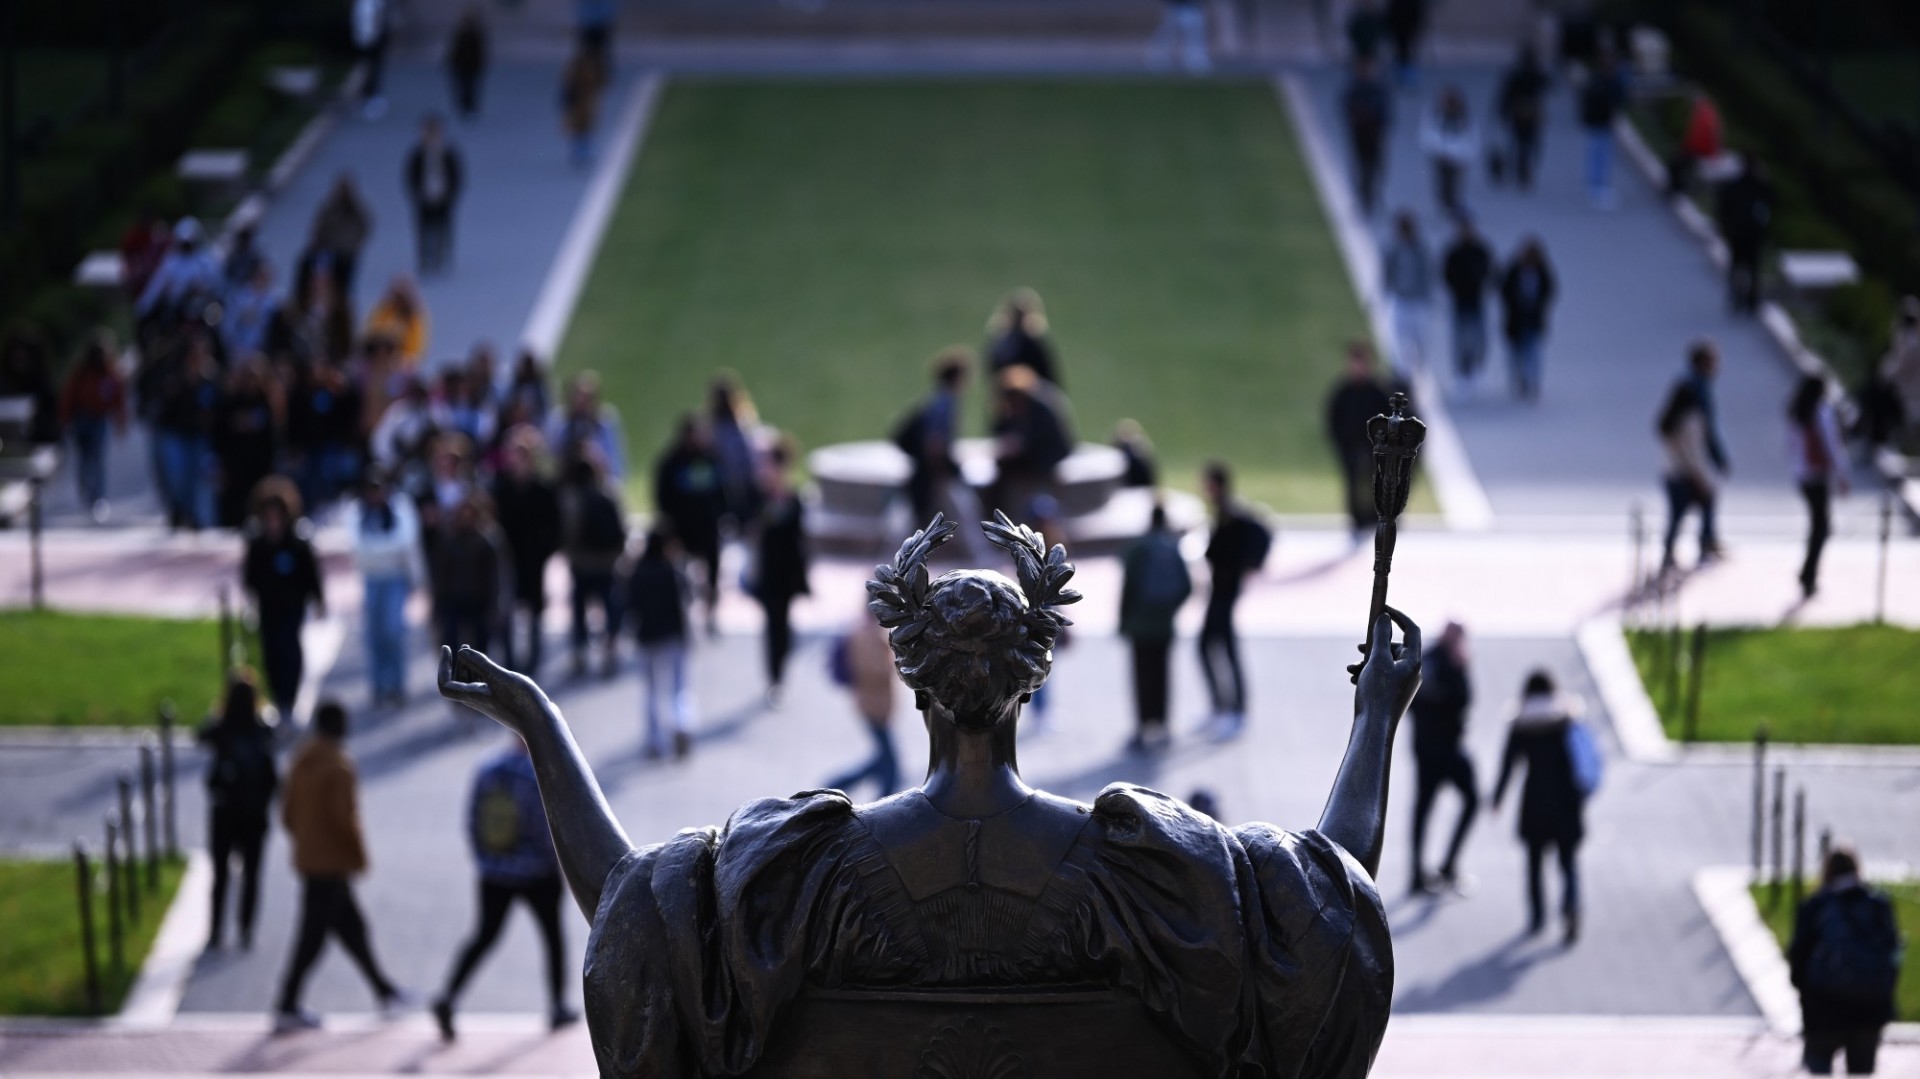 Statue of Alma Mater on Columbia's campus, with students walking in front. 